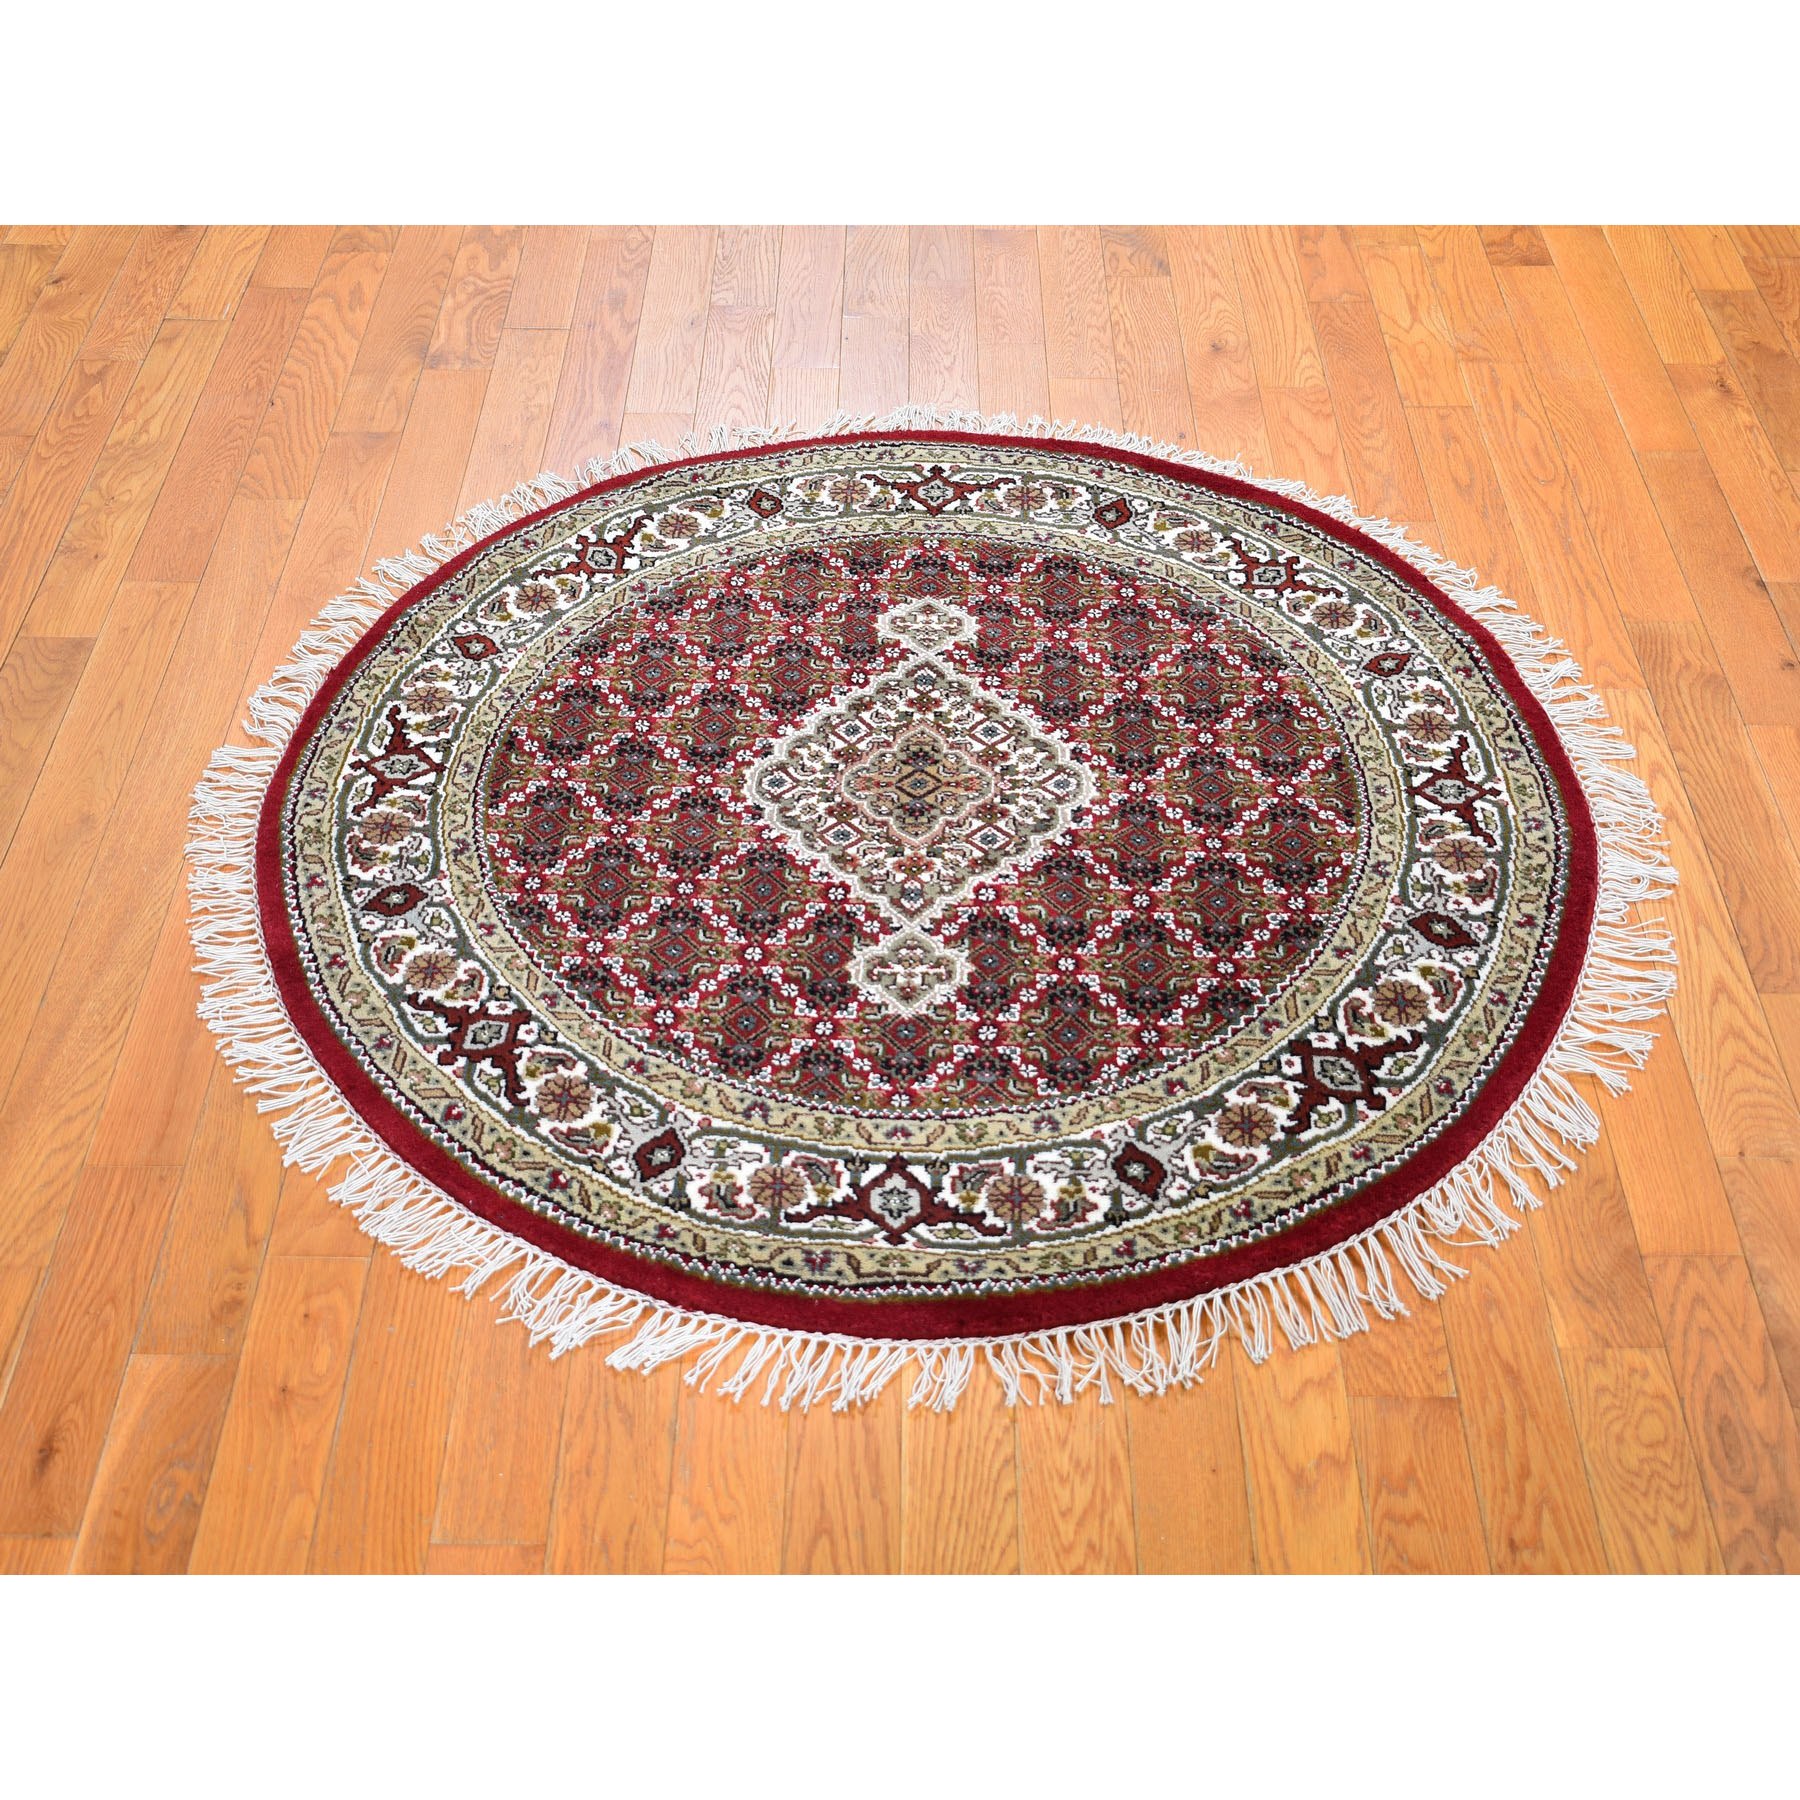 4-x4- Round Red Tabriz Mahi Wool and Silk Hand Knotted Oriental Rug 